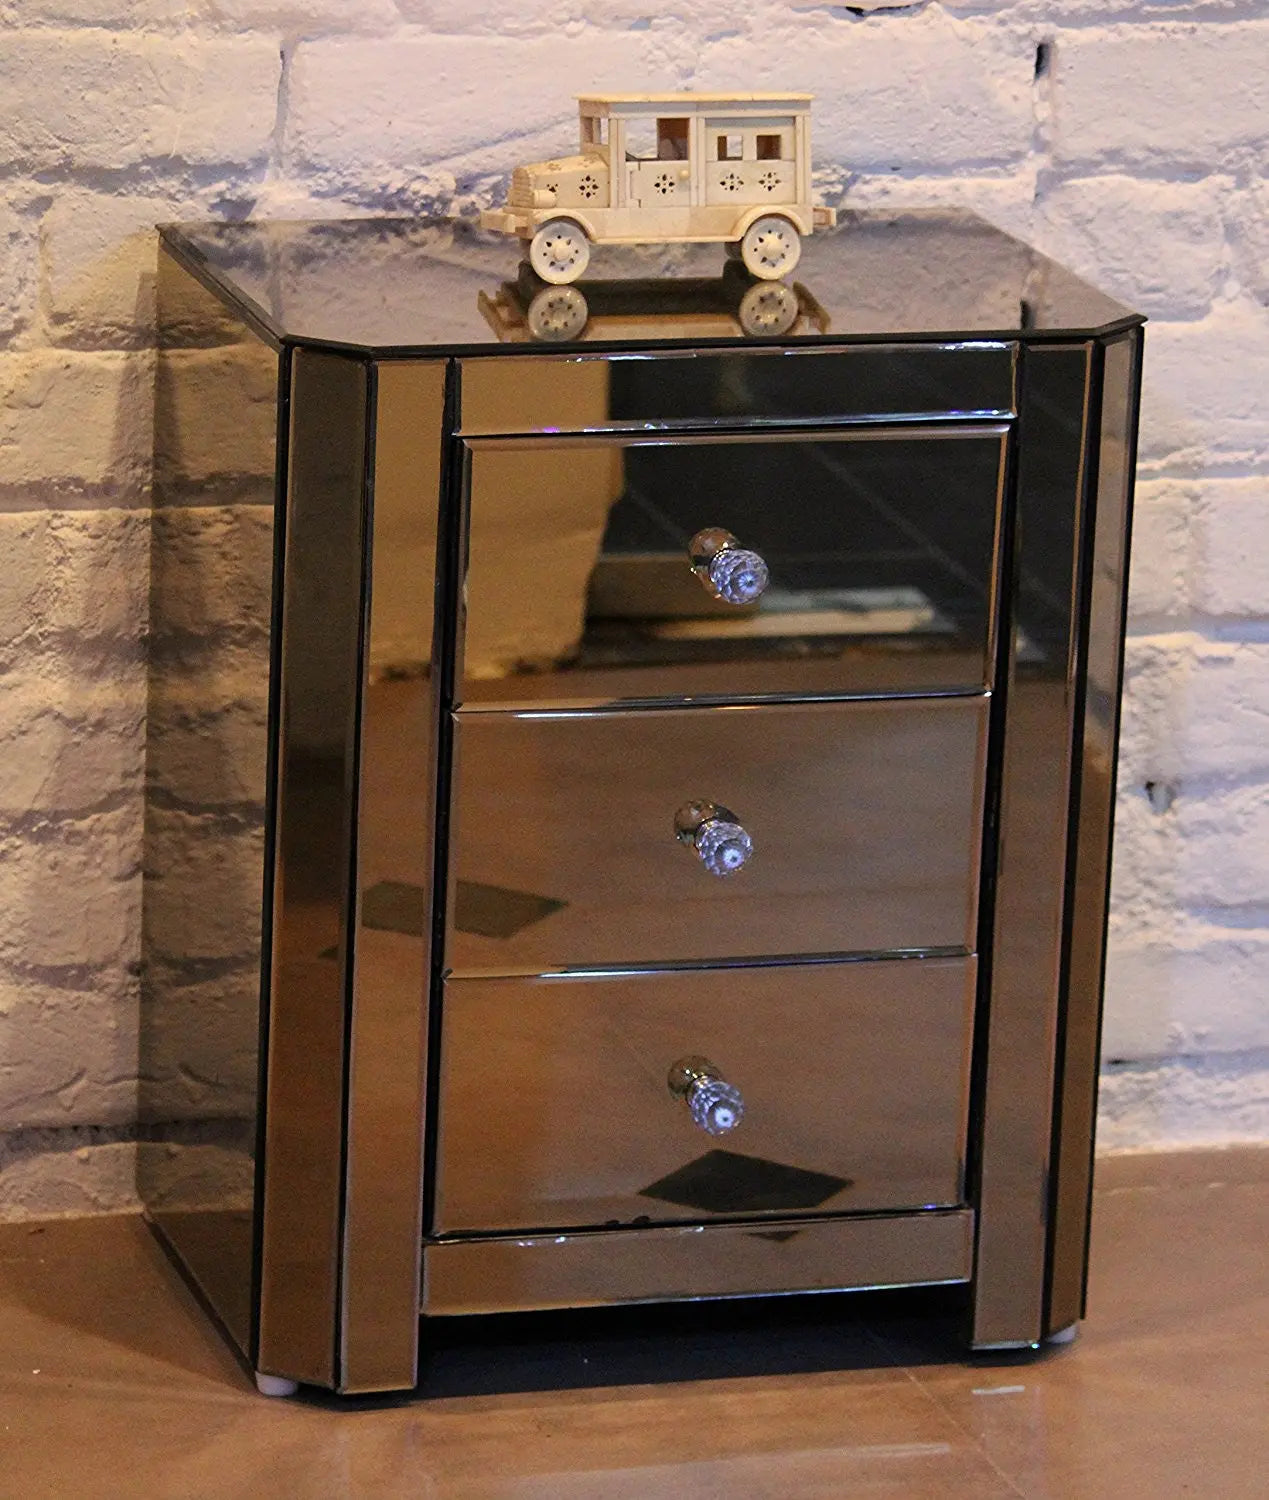 Mirrored Bed Side Table, 3 Drawer , Bronze Coloured Glass, VDMF402